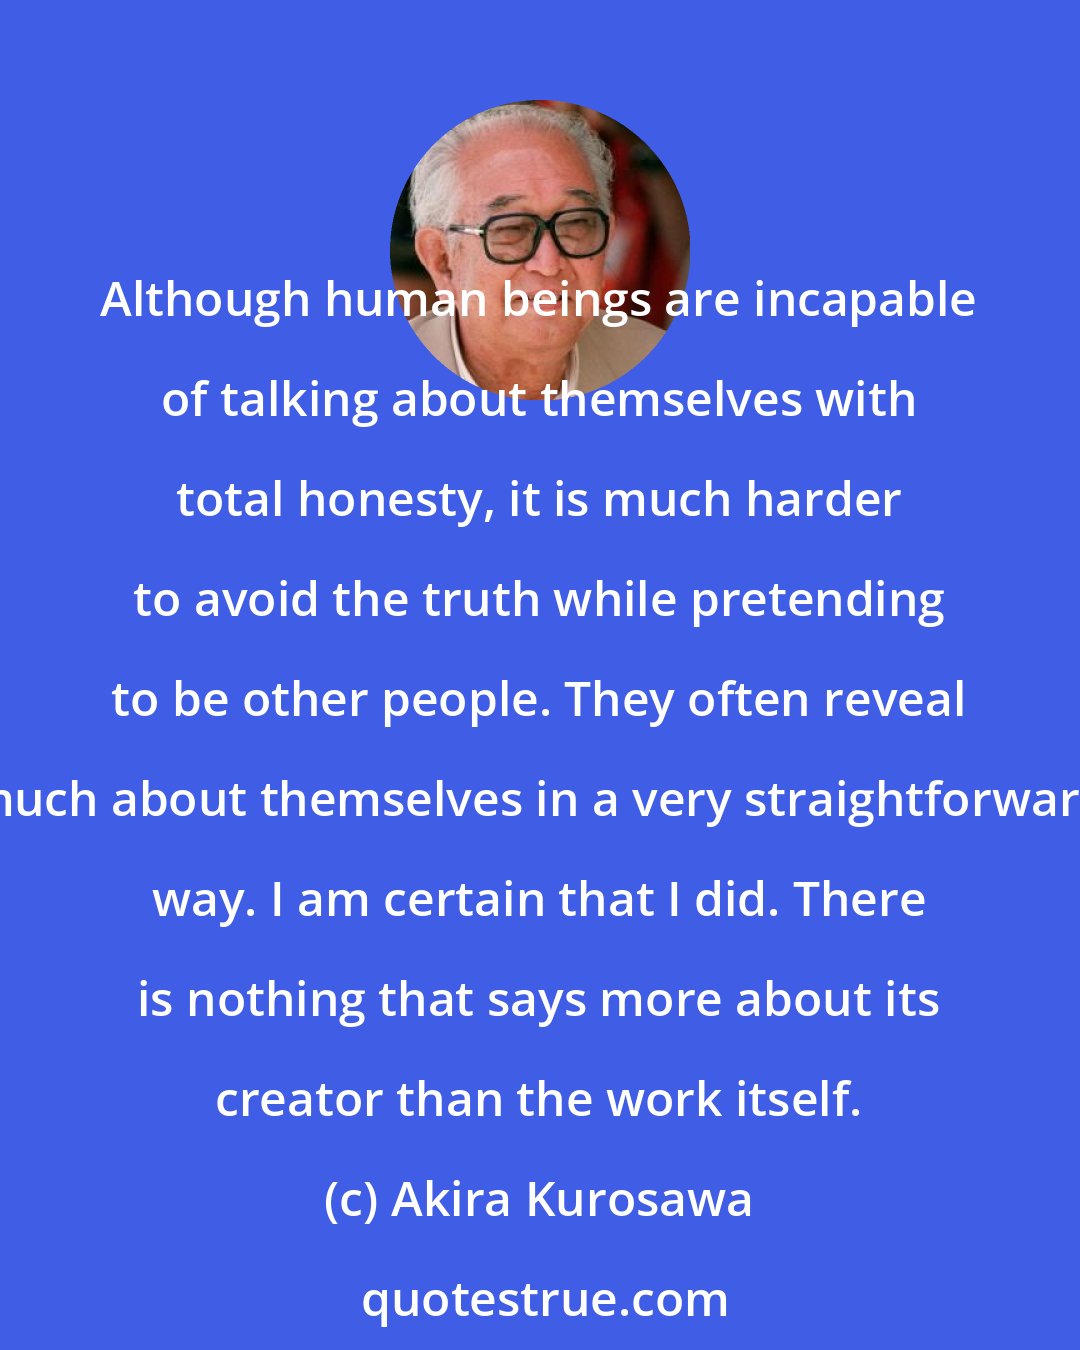 Akira Kurosawa: Although human beings are incapable of talking about themselves with total honesty, it is much harder to avoid the truth while pretending to be other people. They often reveal much about themselves in a very straightforward way. I am certain that I did. There is nothing that says more about its creator than the work itself.